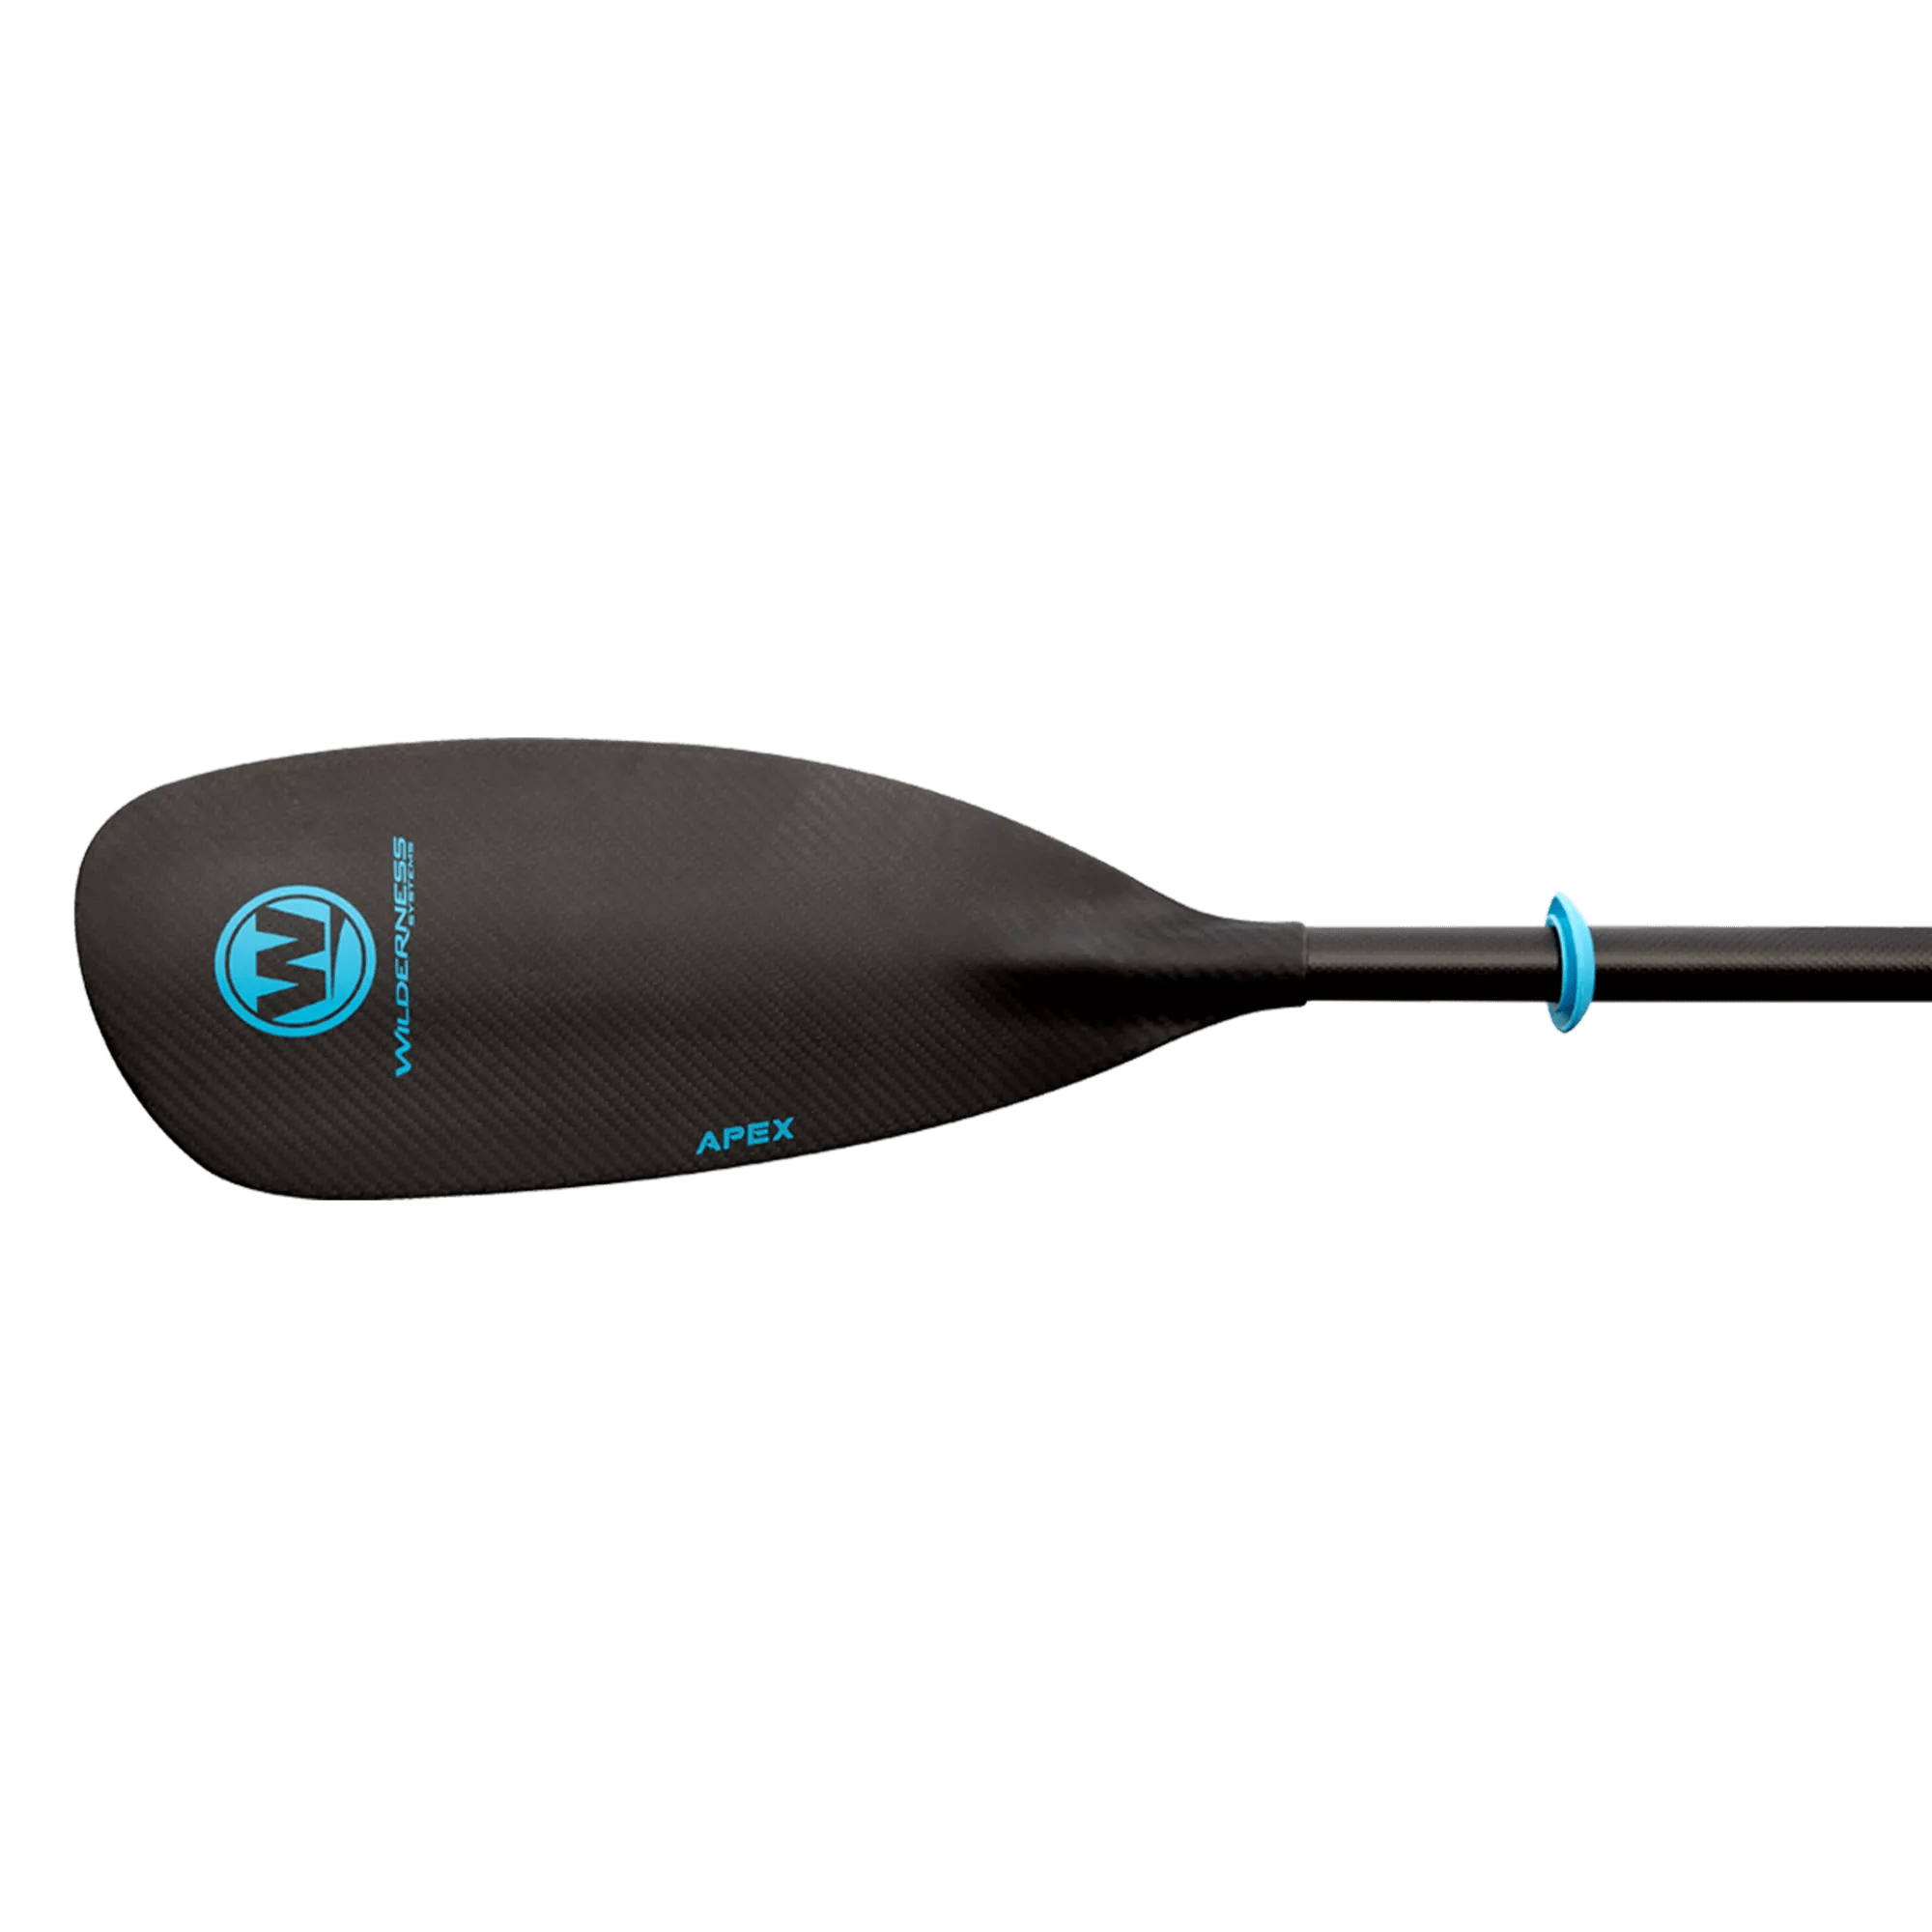 WILDERNESS SYSTEMS - Apex Carbon Kayak Paddle 205-225 cm - Blue - 8070223 - TOP